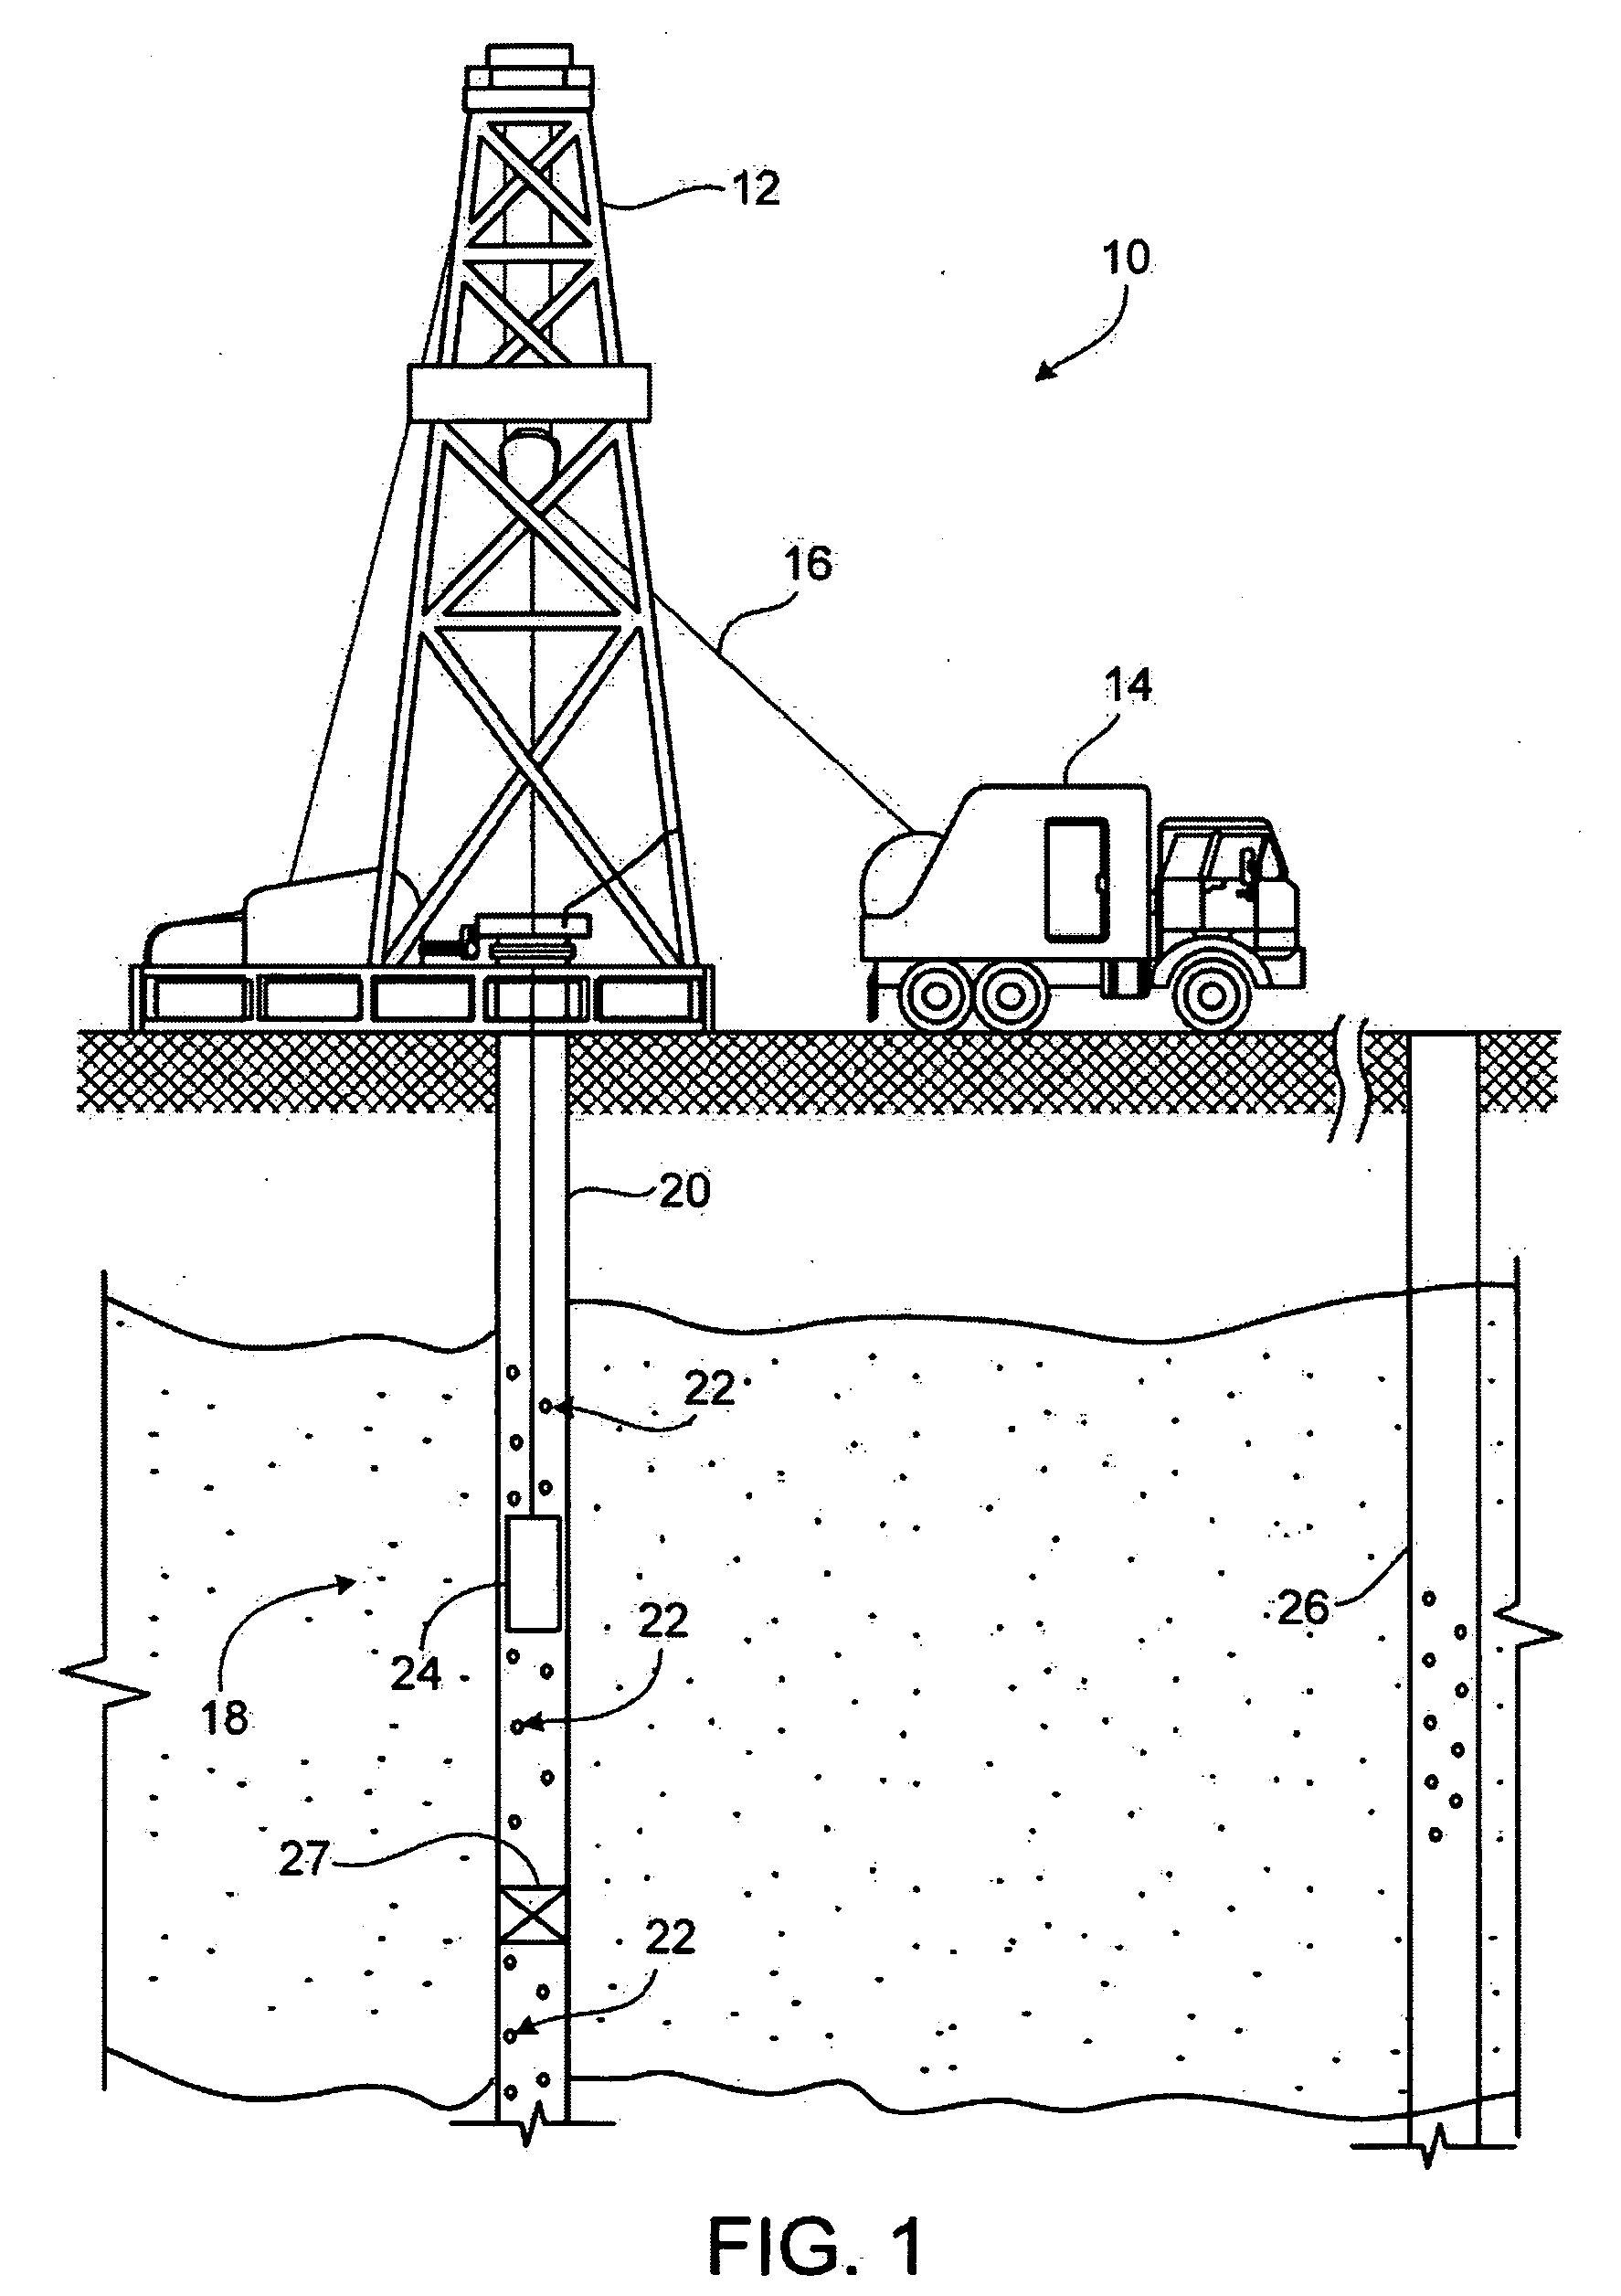 Detecting Fluids In a Wellbore